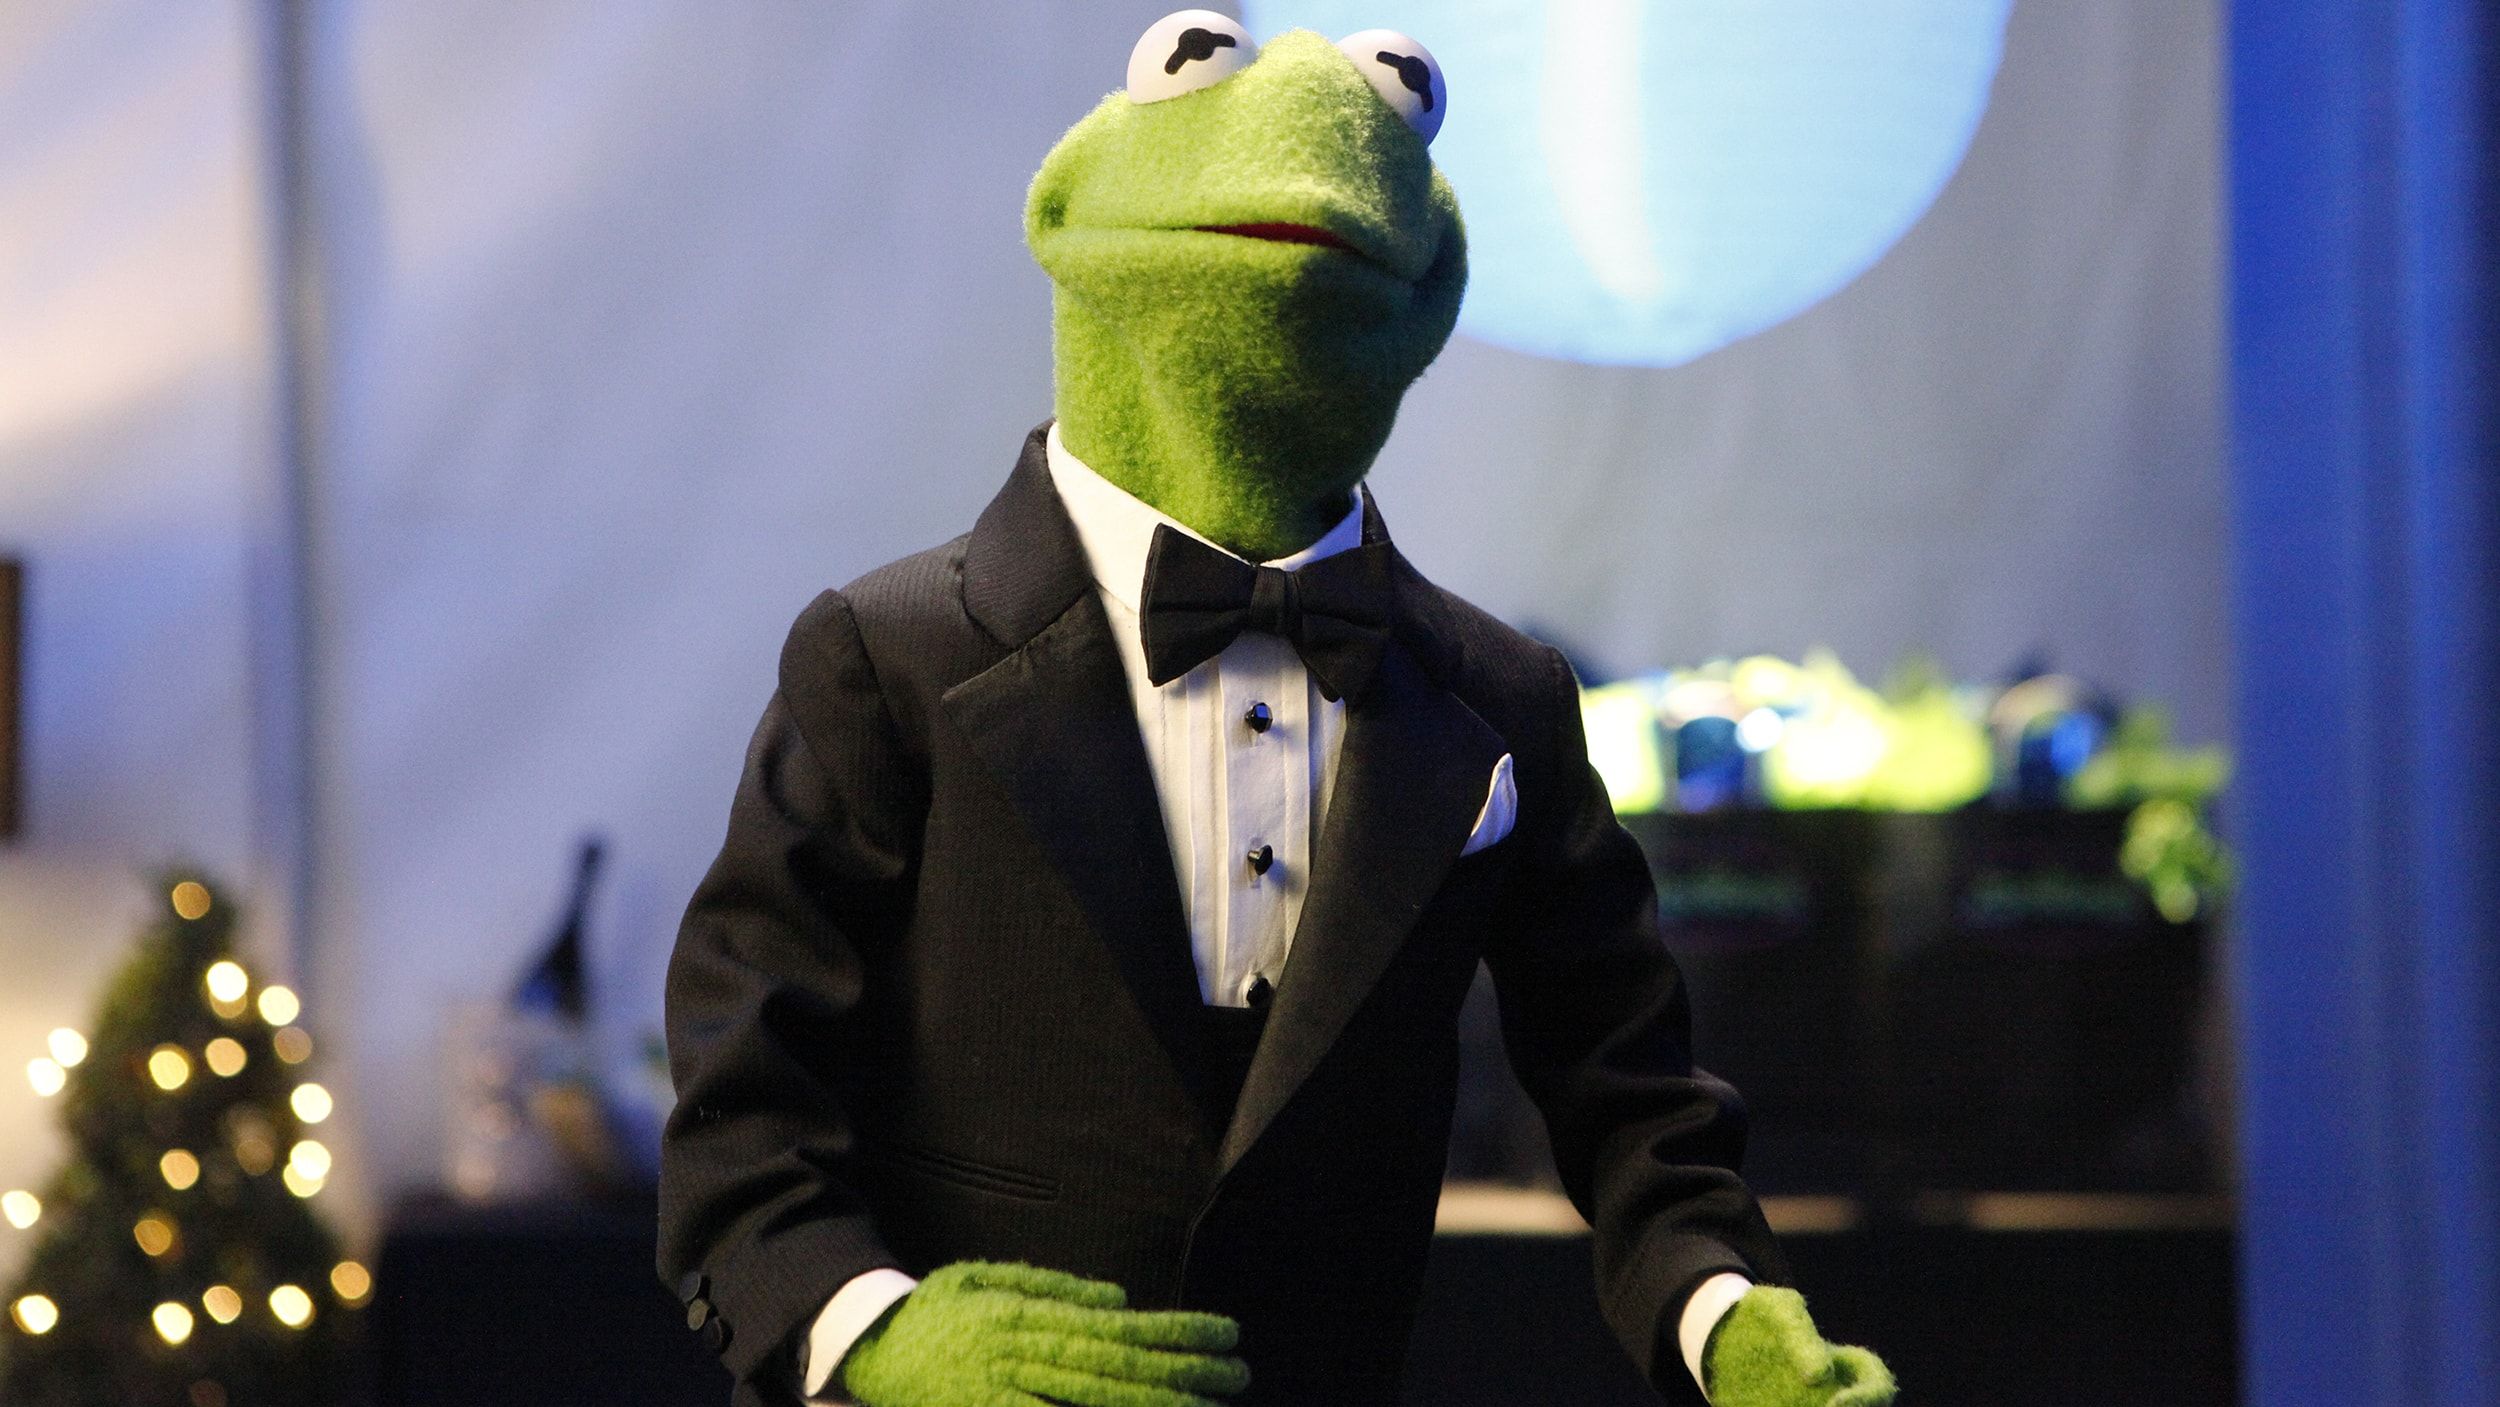 Kermit The Frog Was Made Out Of An Old Coat